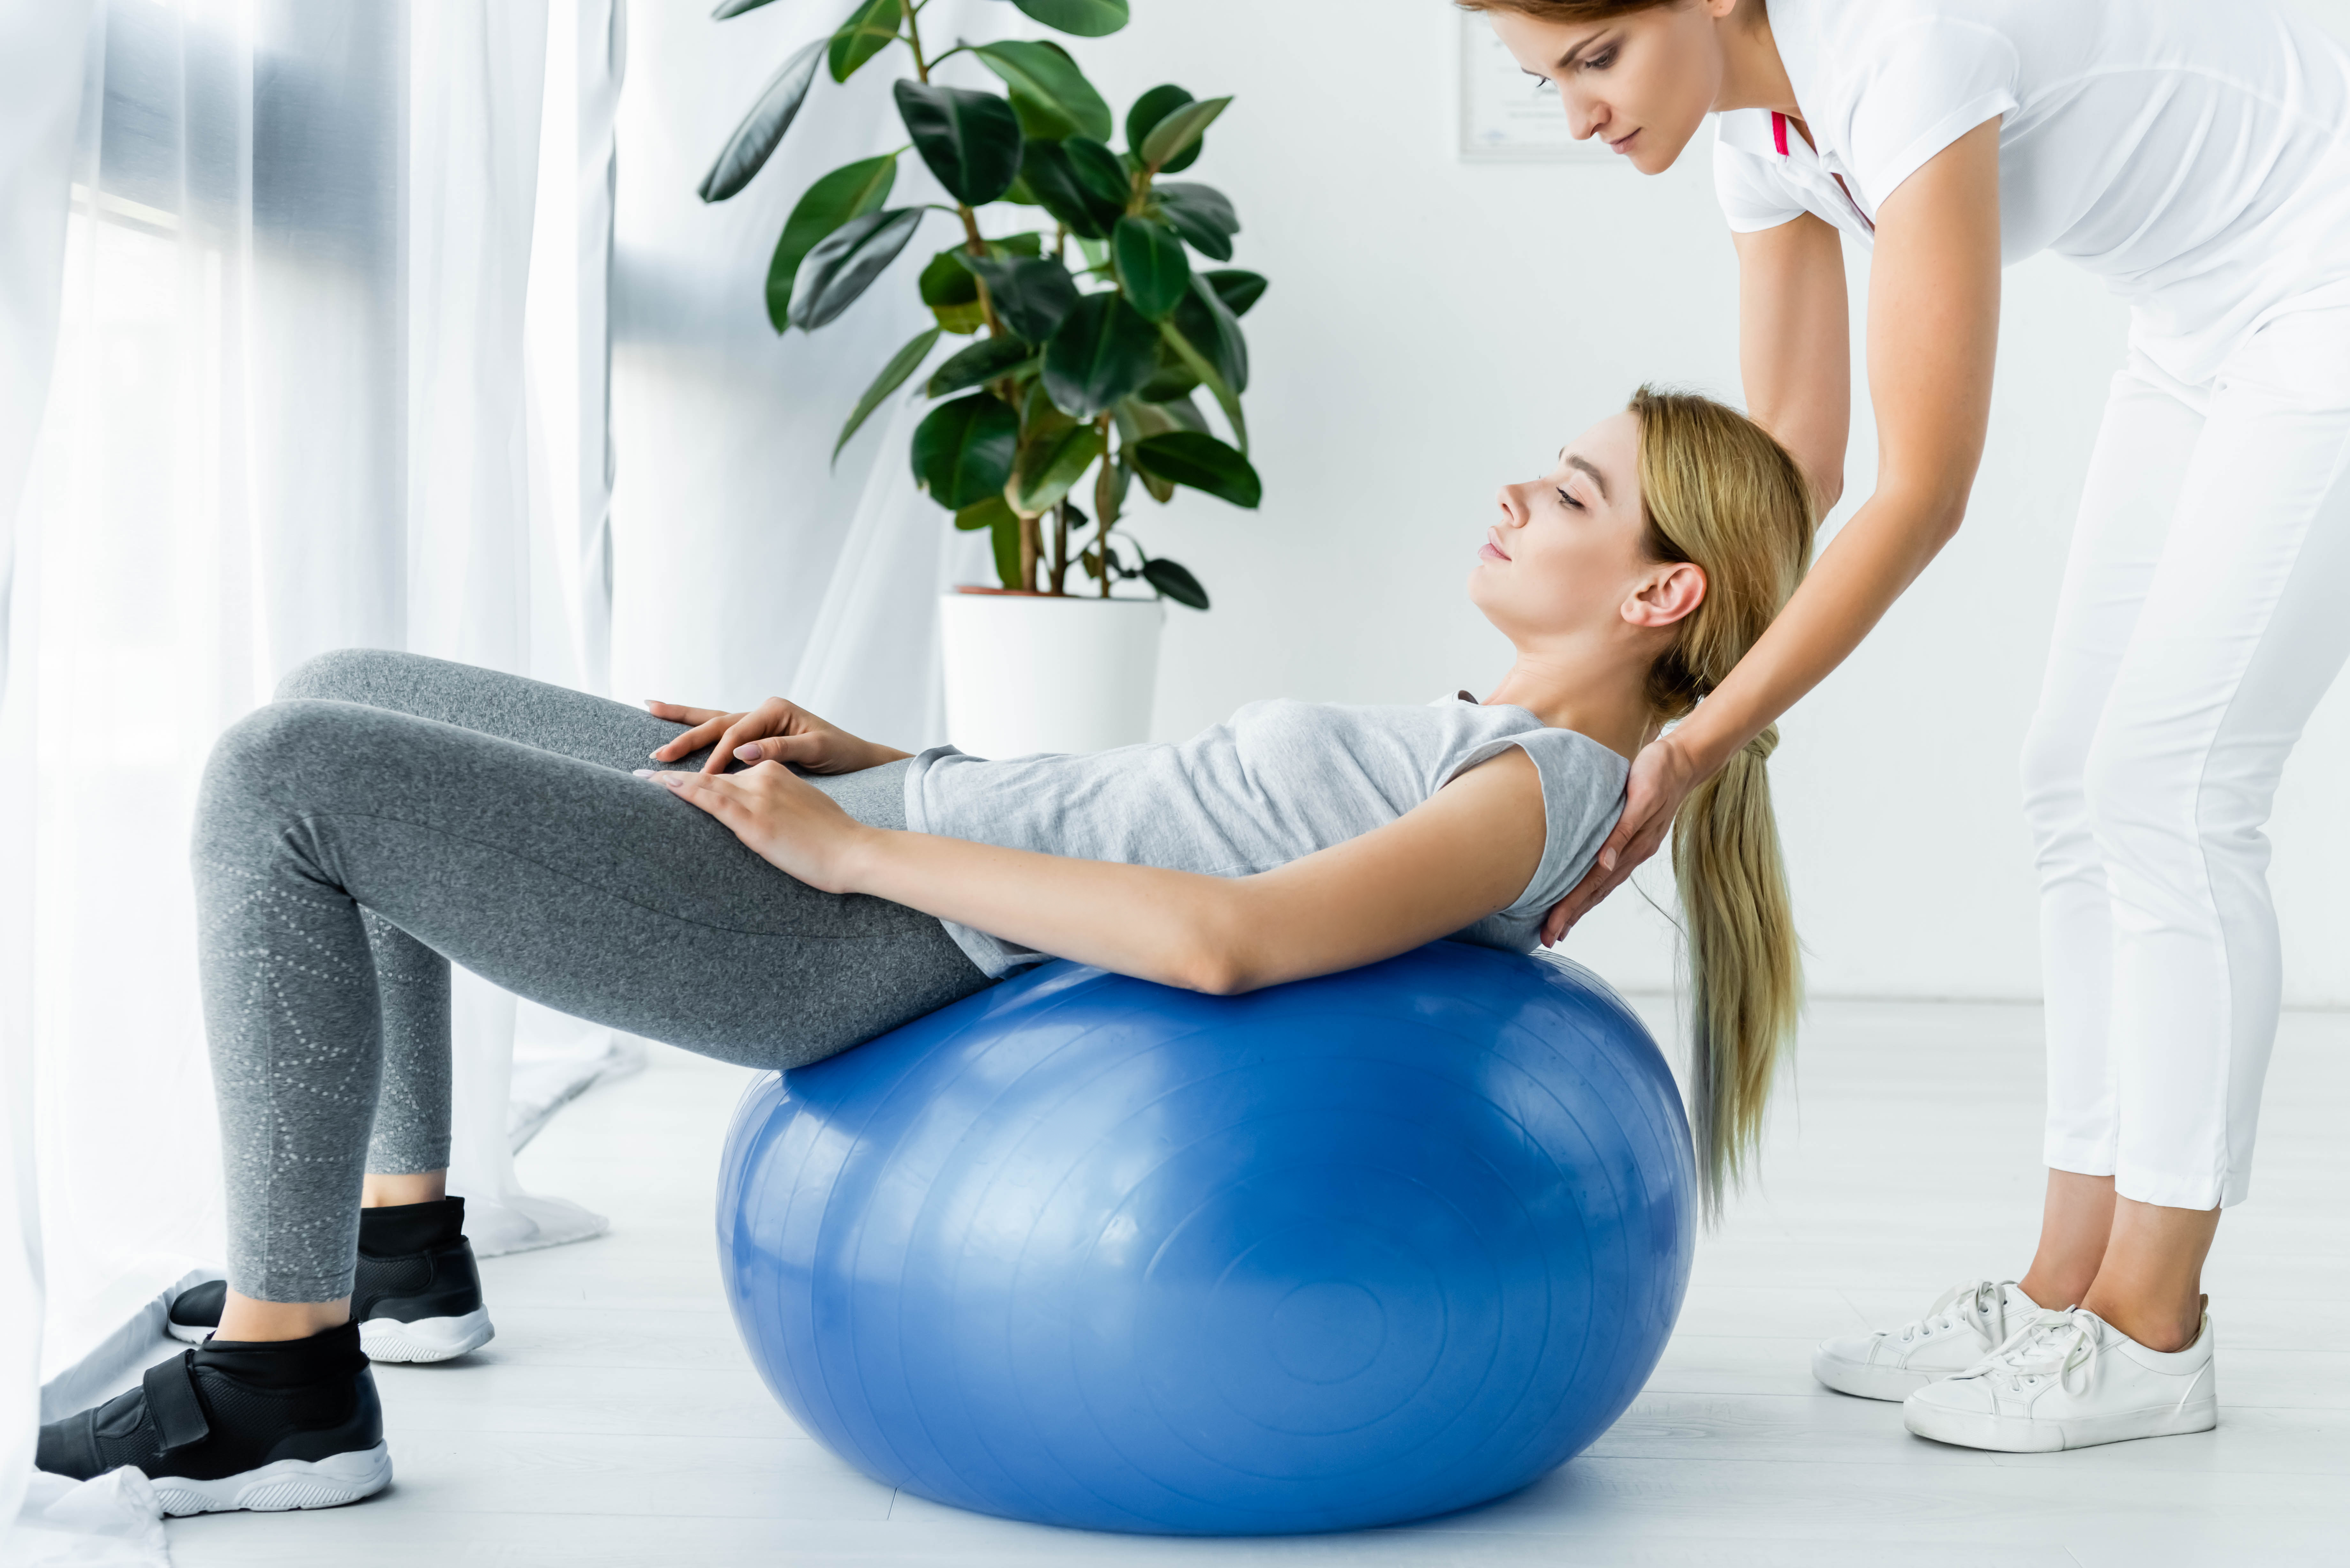 woman on an exercise ball being helped by a therapist